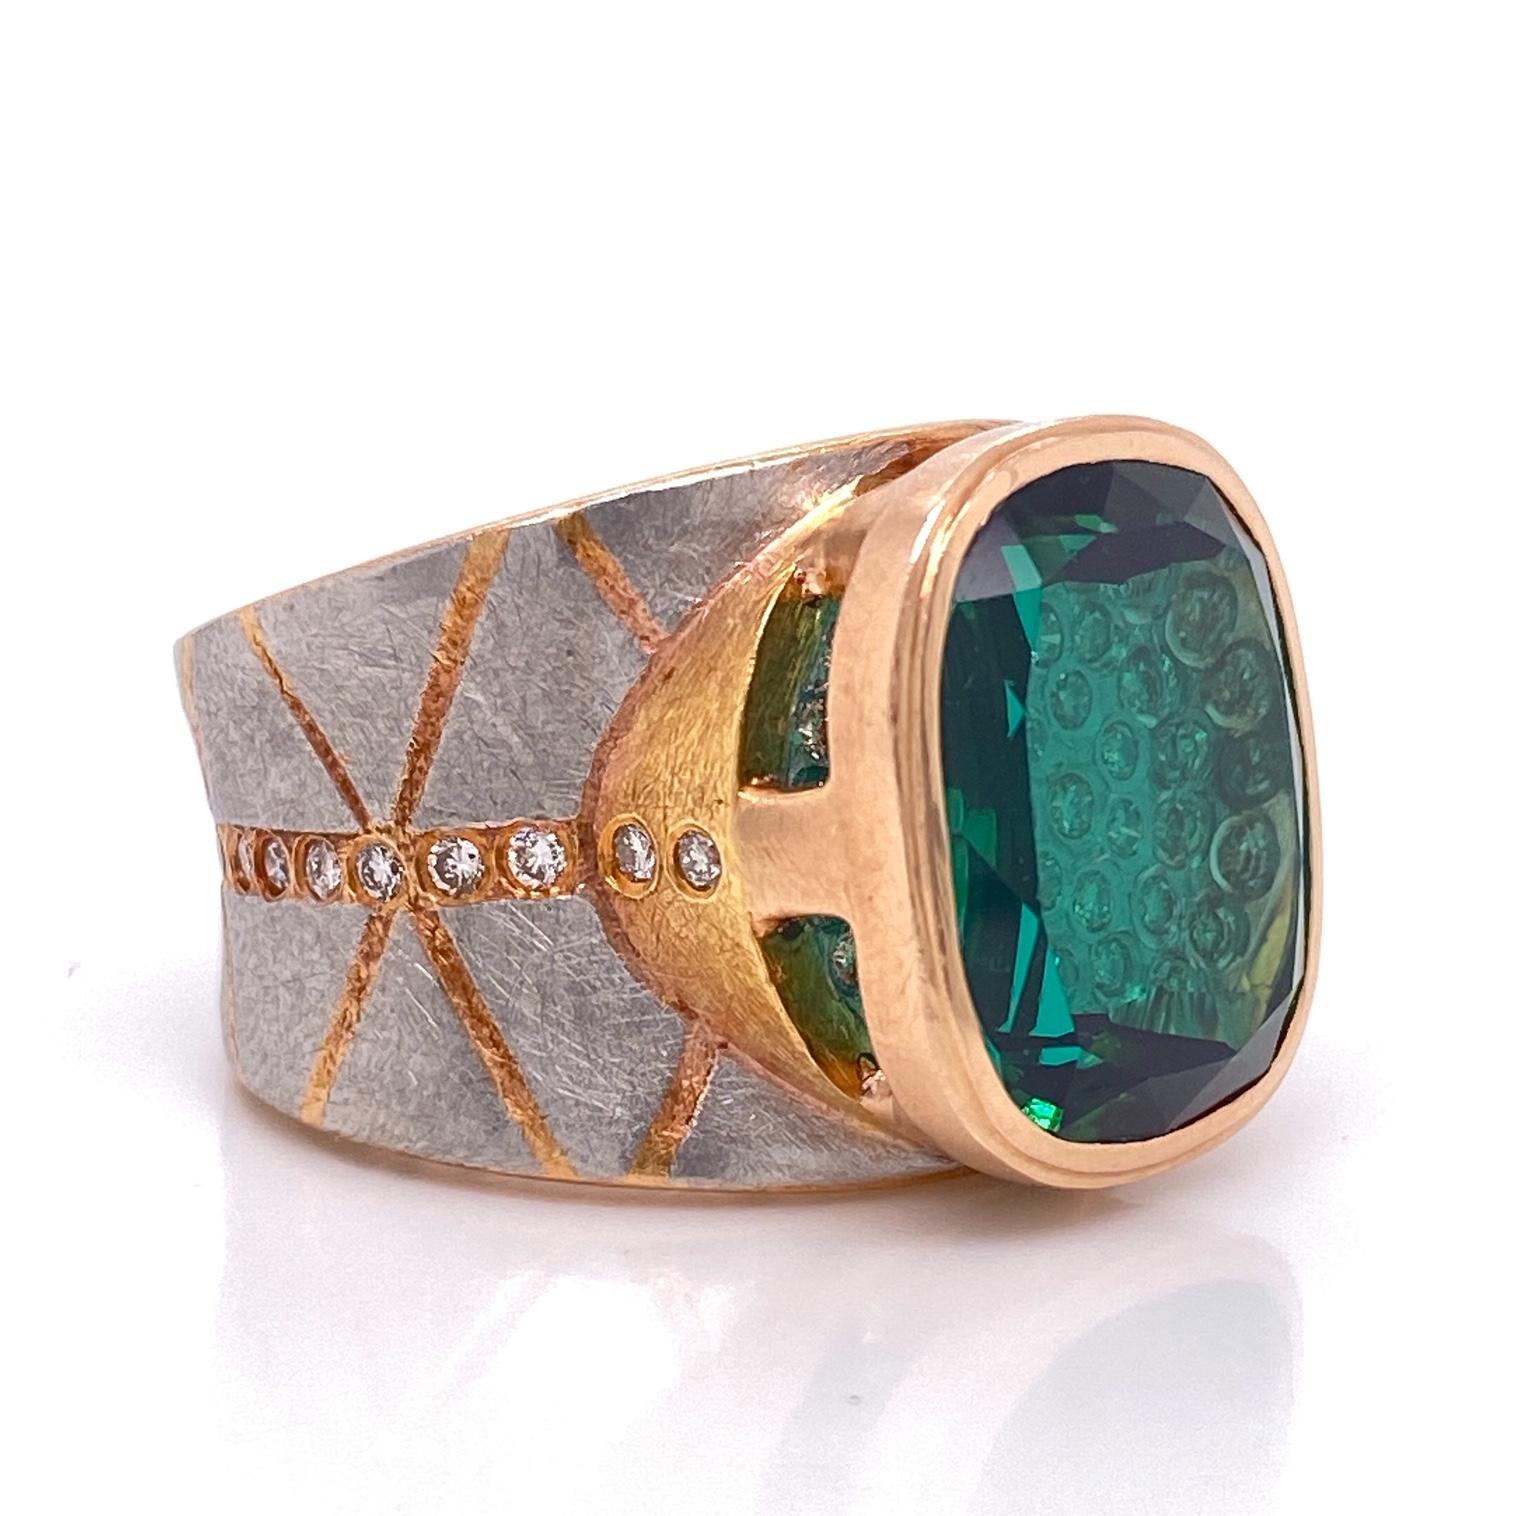 A platinum and 18k rose gold ring set with a 16.12mm x 13.08mm lens cut green tourmaline and 60 round full cut diamonds for a .9 total carat weight.  Designed and made by llyn strong and Michael Zobel as a collaboration.